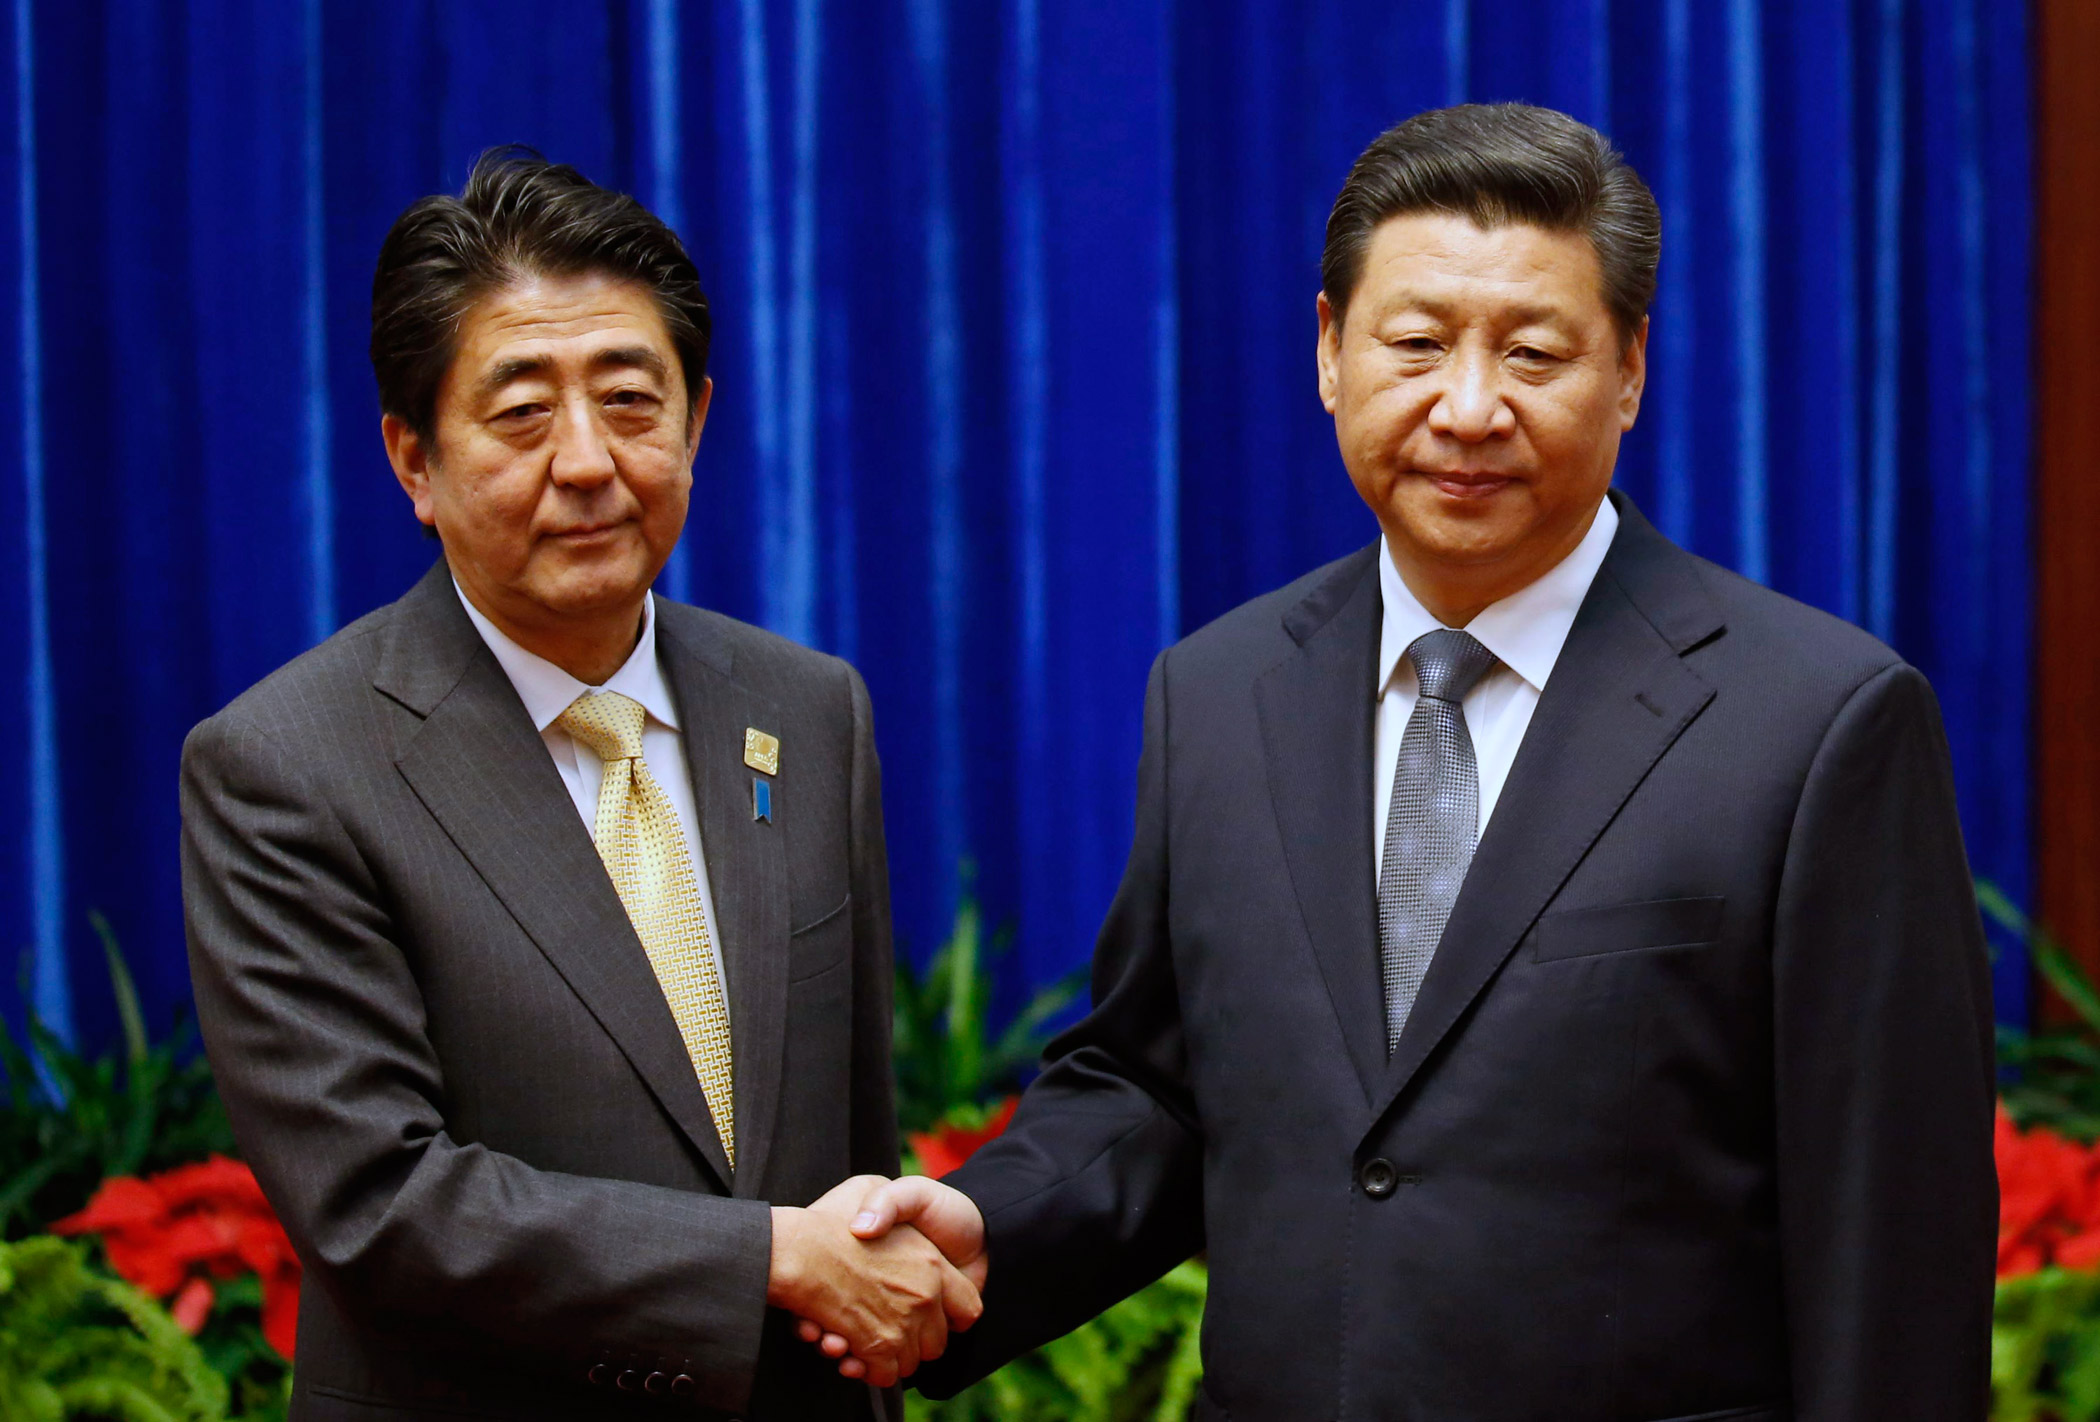 Chinese President Xi Jinping, right, shakes hands with Japanese Prime Minister Shinzo Abe, during their meeting on the sidelines of the Asia Pacific Economic Cooperation (APEC) meetings on Nov. 10, 2014 in Beijing.